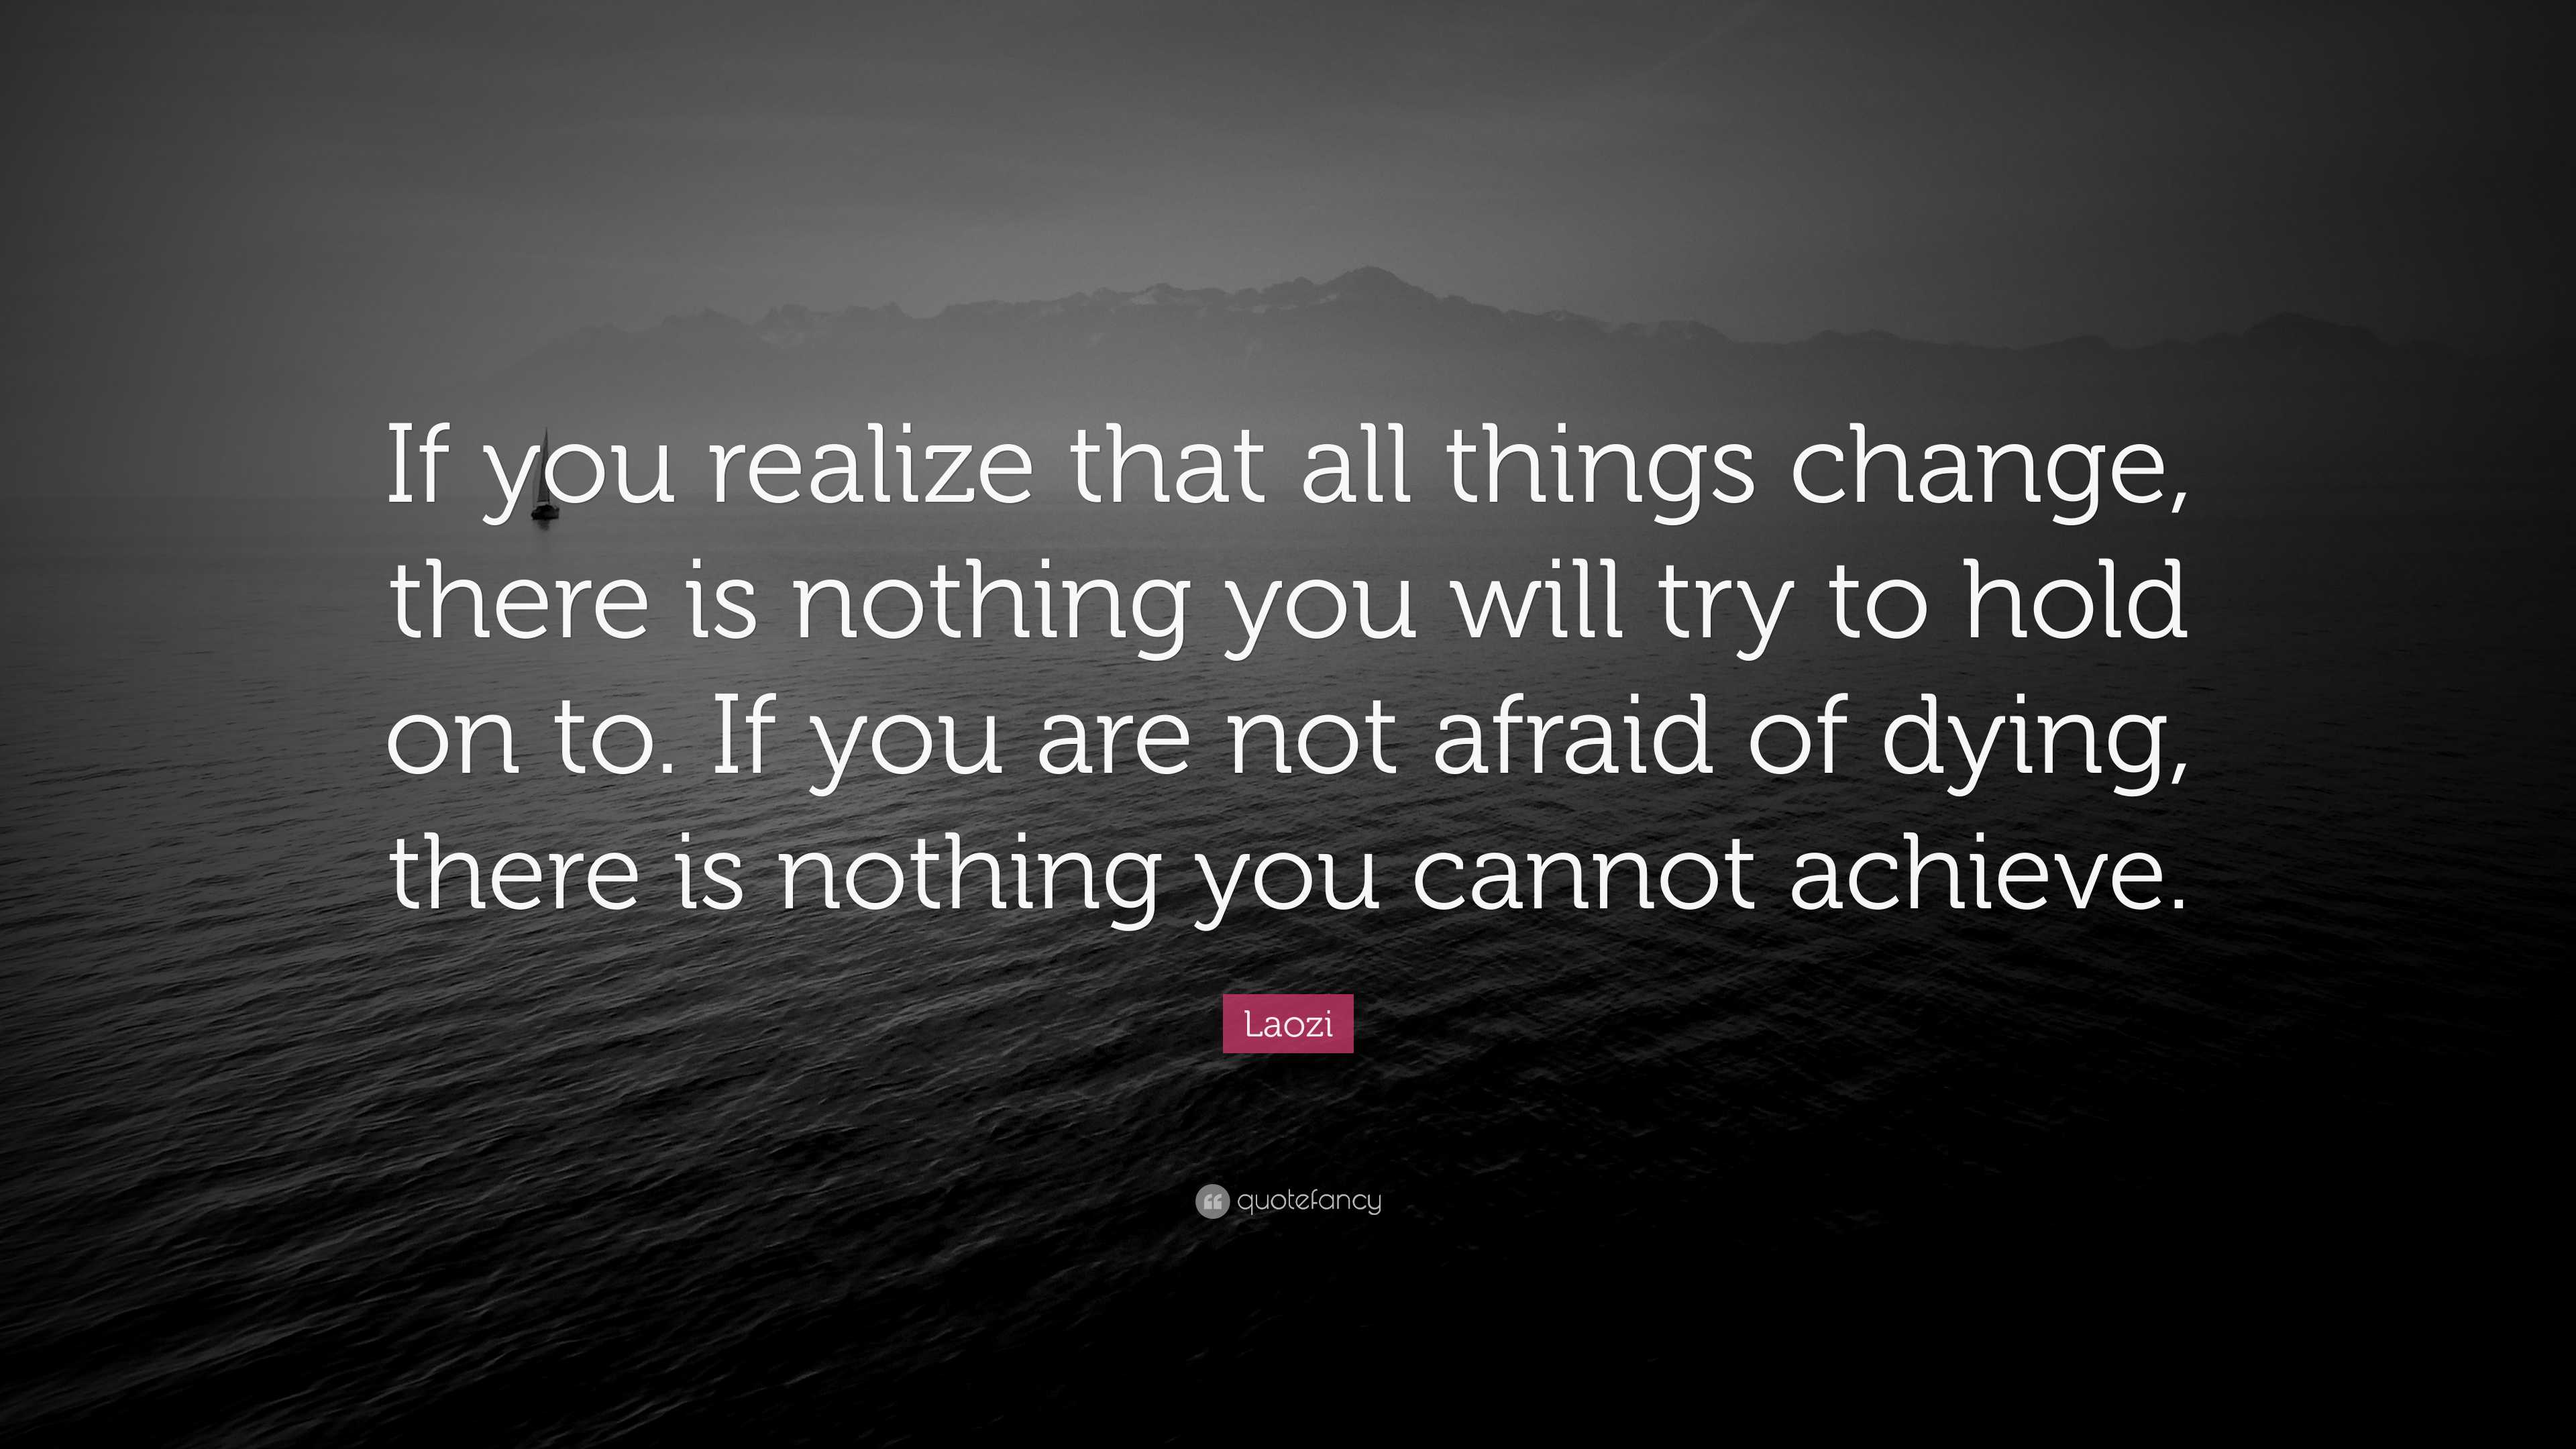 Laozi Quote: “If you realize that all things change, there is nothing ...